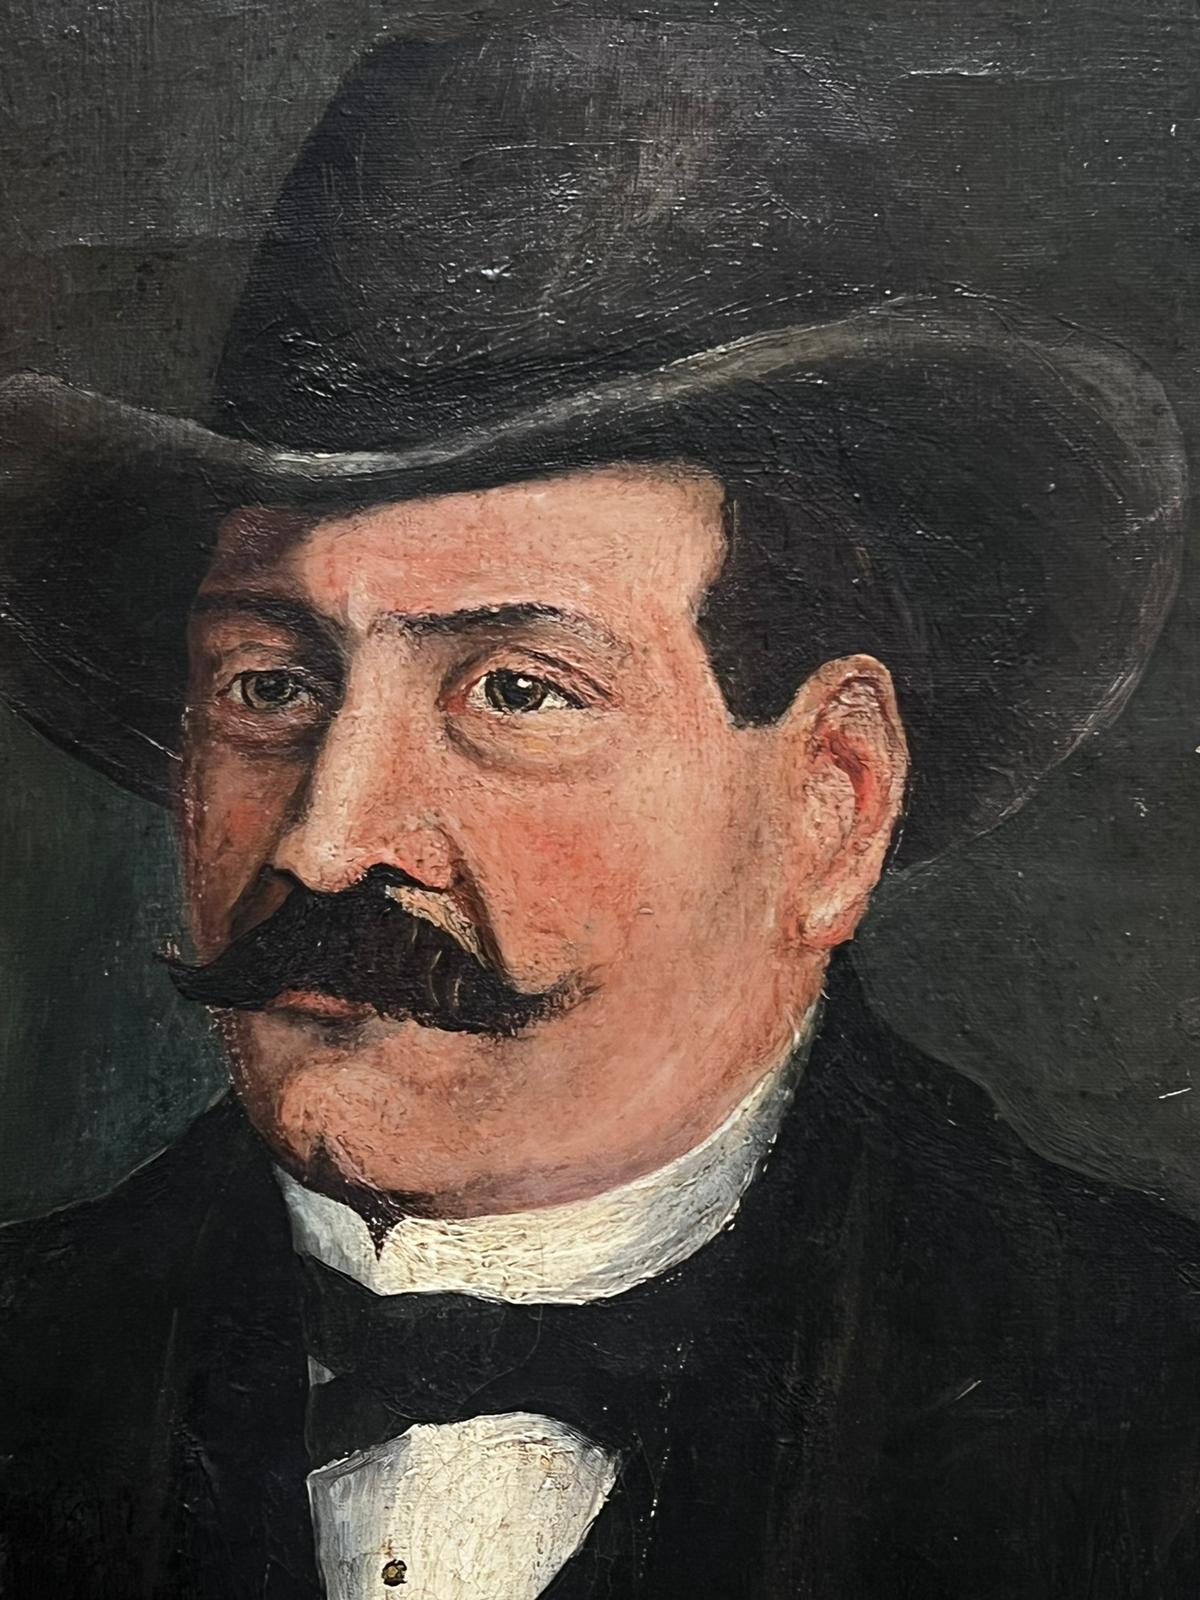 Portrait of a Man with a Hat holding a Pipe
French School, signed and dated 1903
oil on canvas, unframed
canvas: 21.75 x 18 inches
provenance: private collection, France
condition: several scuffs and surface scratches but basically very sound